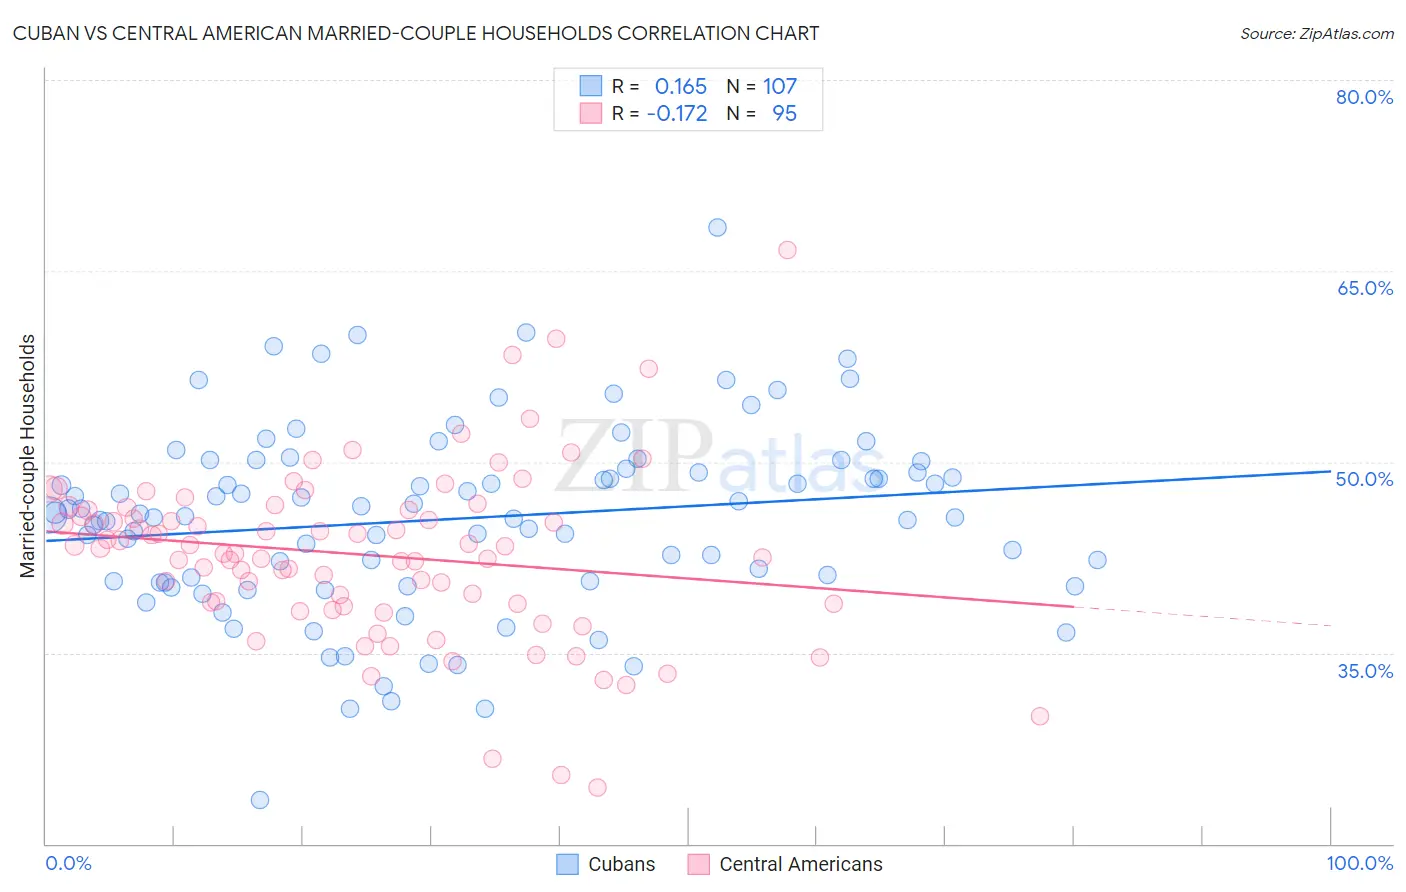 Cuban vs Central American Married-couple Households